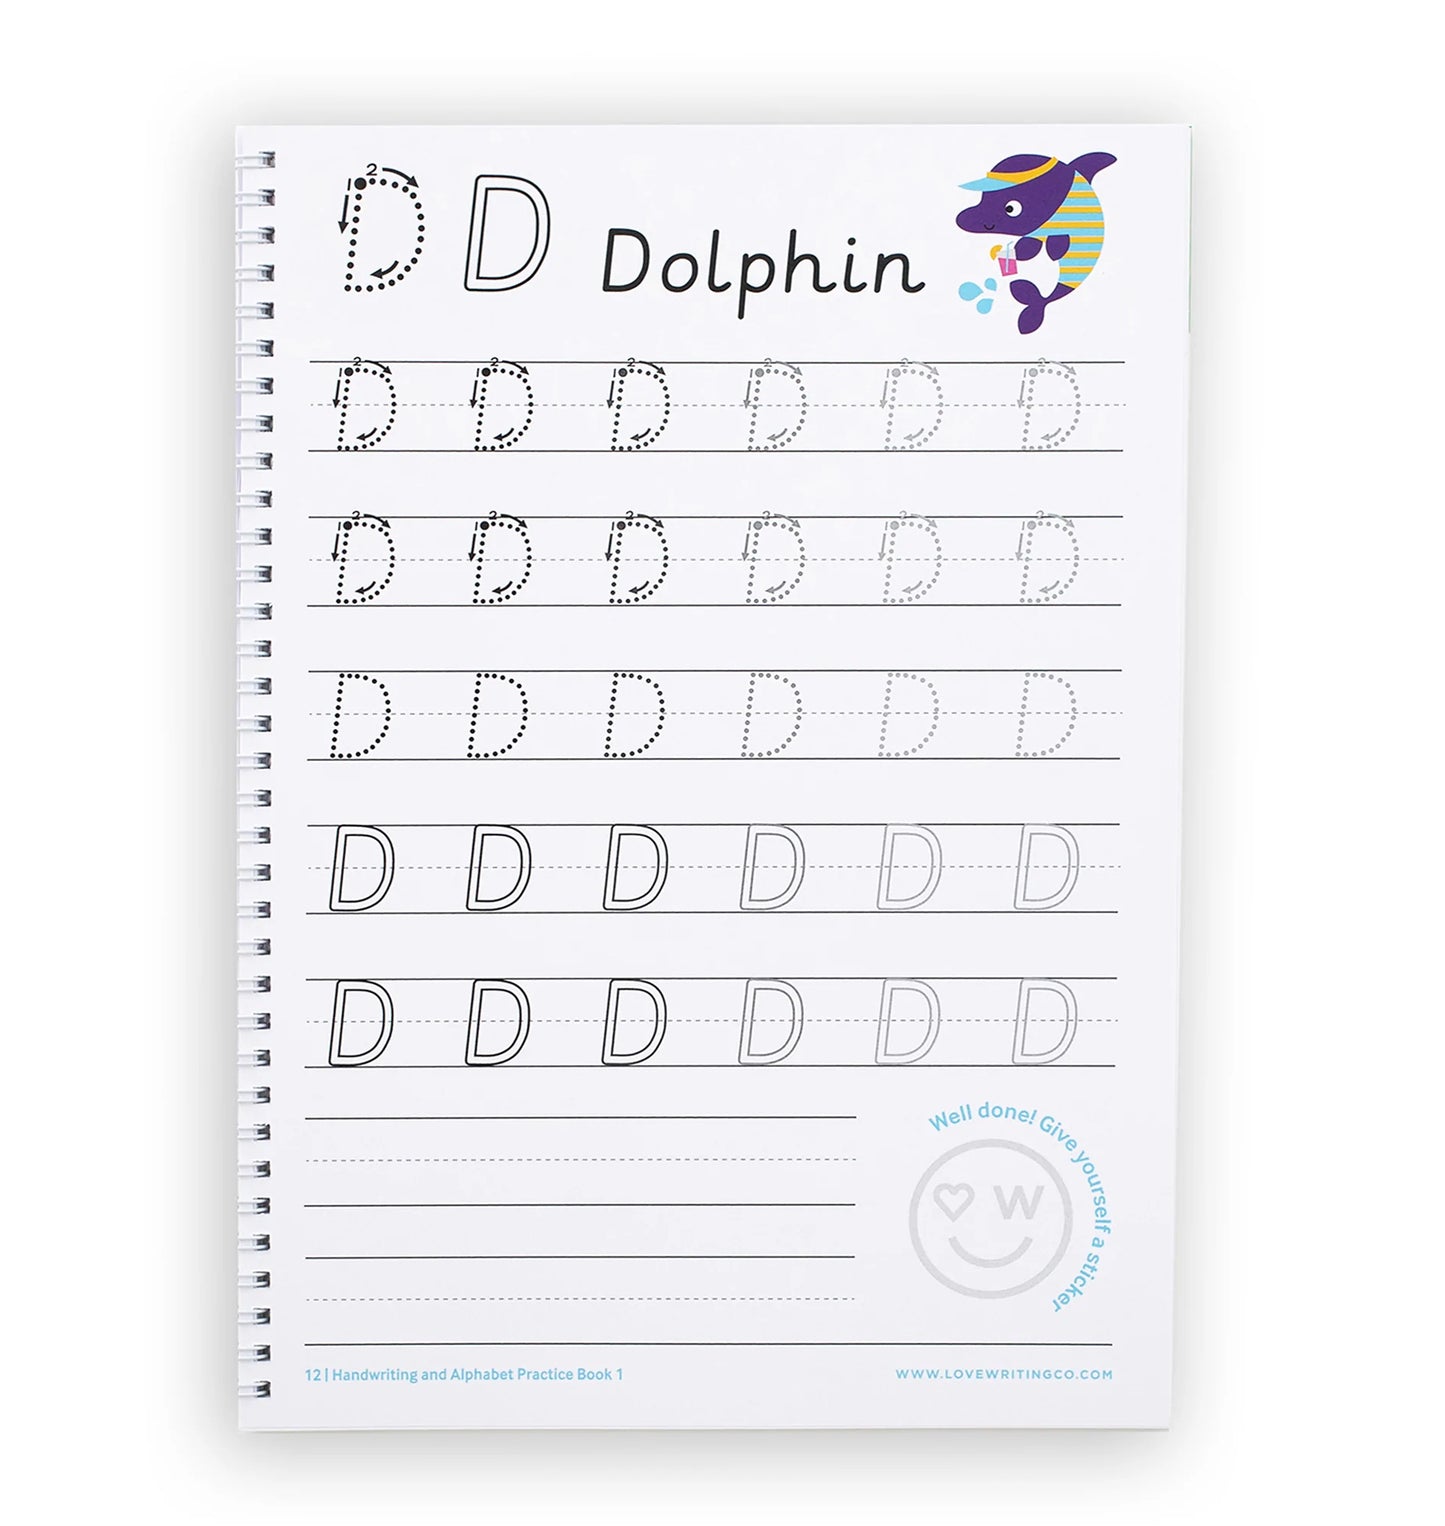 Love Writing Co. Handwriting and Alphabet practice Book 1 - age 3-5 years